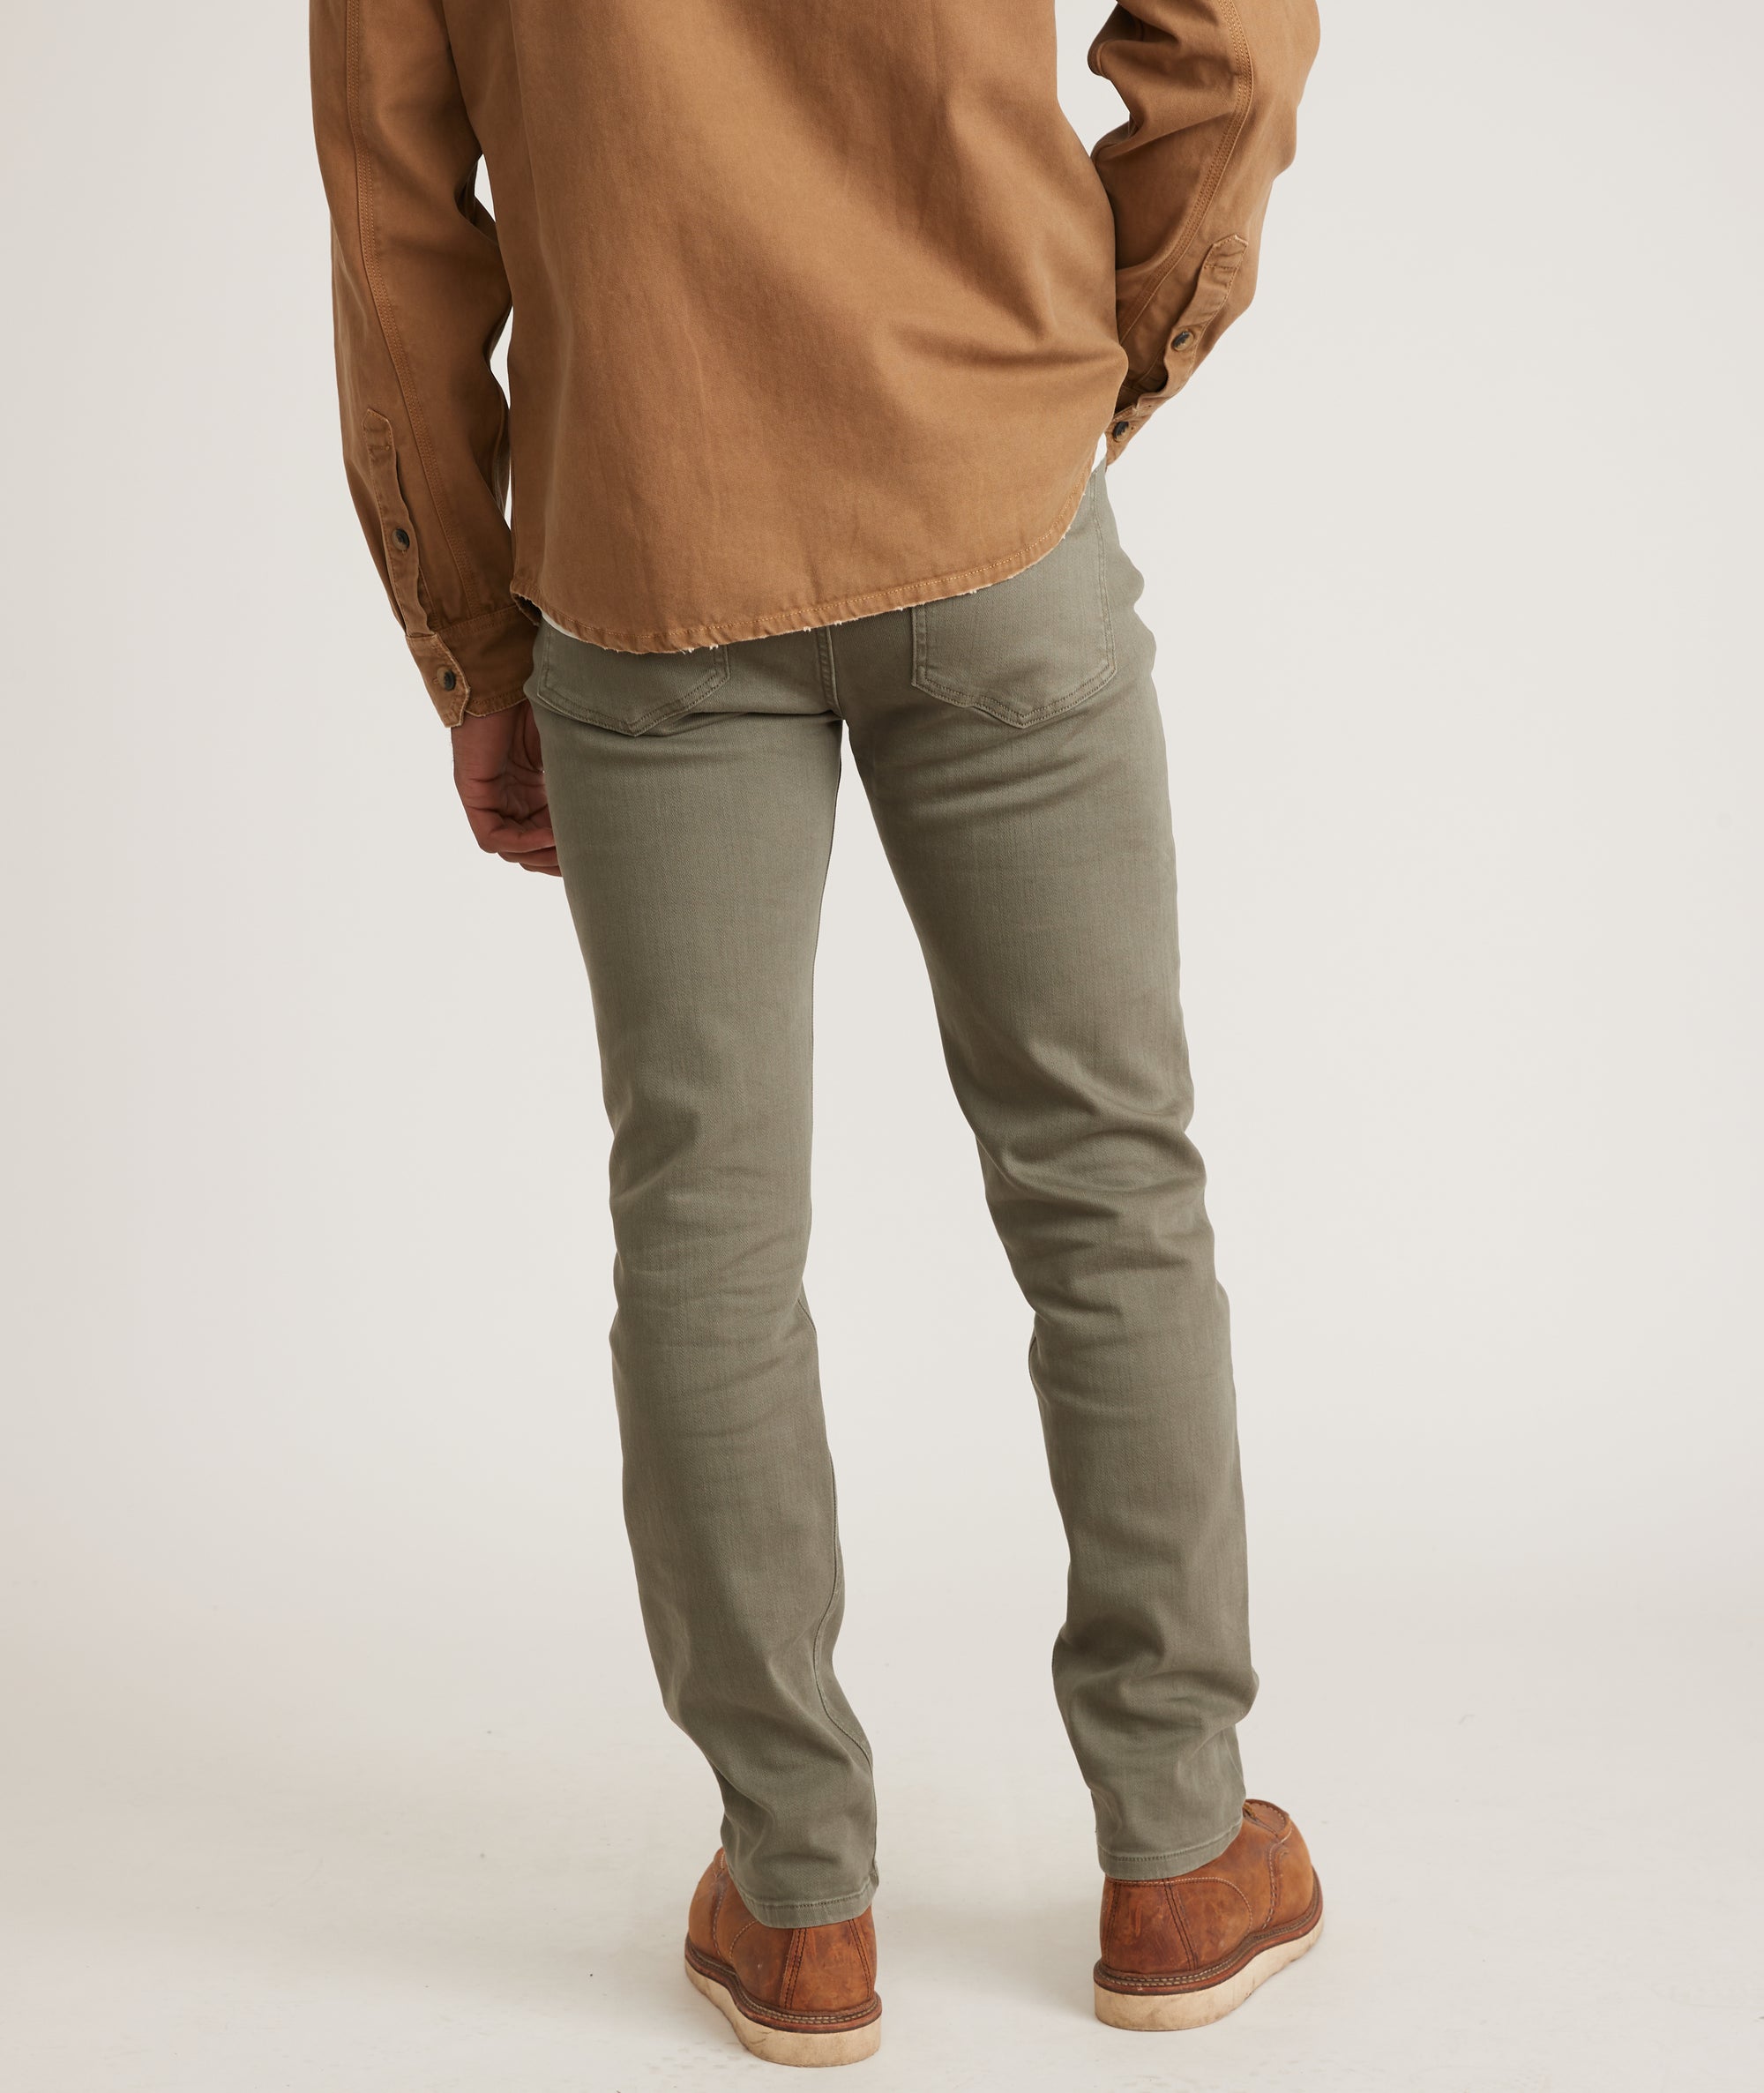 5 Pocket Pant Slim Fit in Faded Olive – Marine Layer